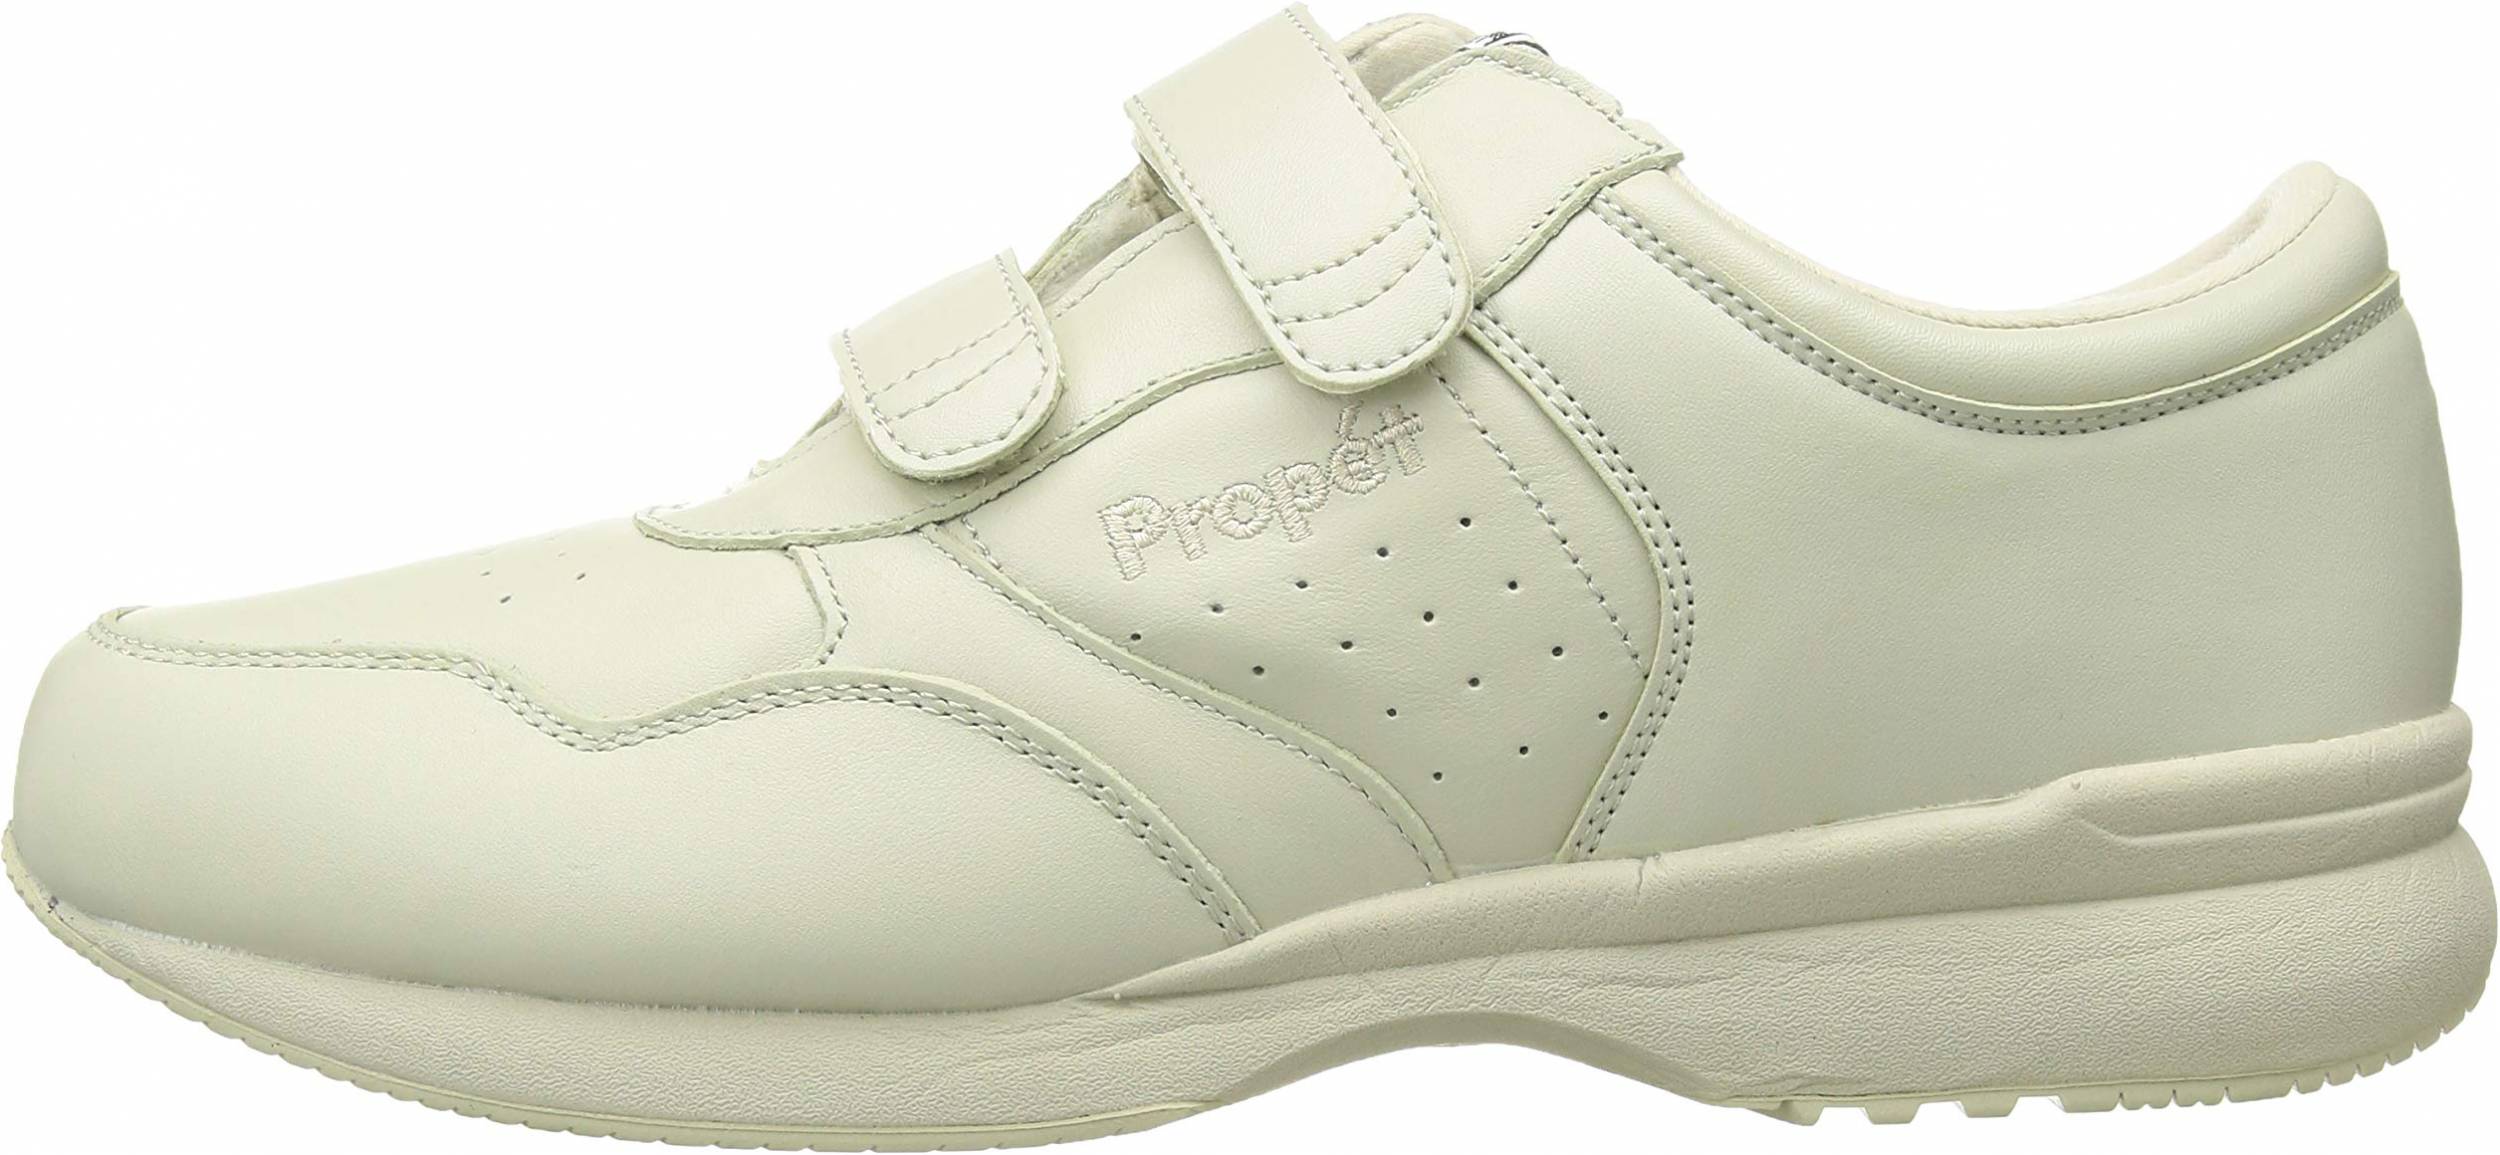 Save 36% on Velcro Walking Shoes (13 